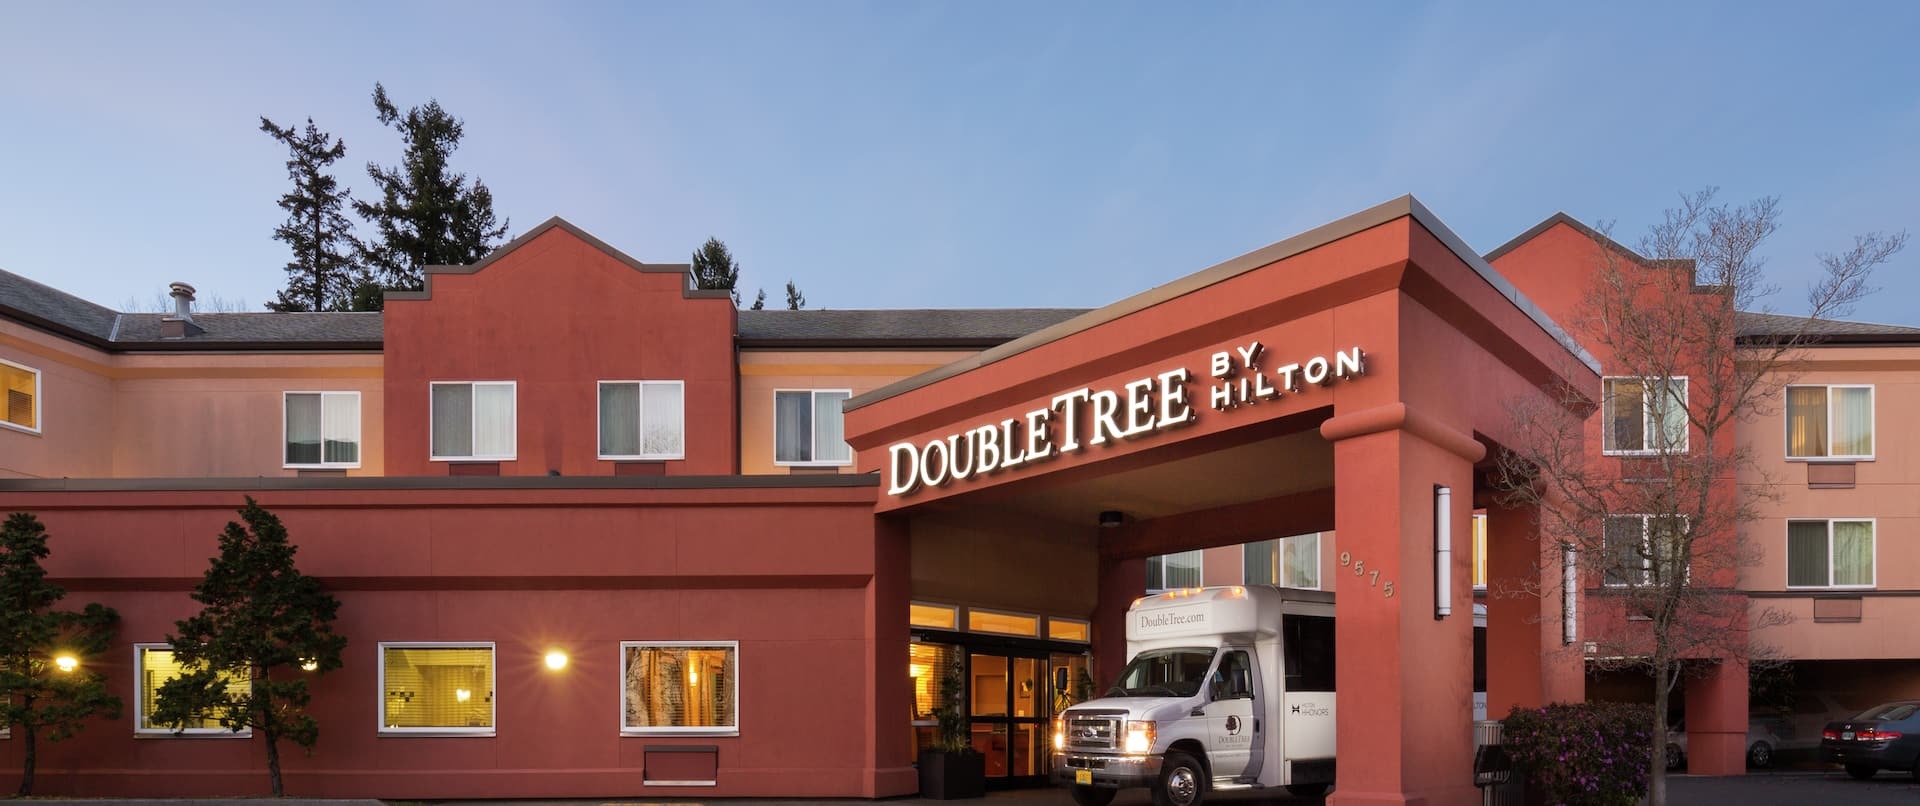 Photo of DoubleTree by Hilton Portland - Tigard, Tigard, OR